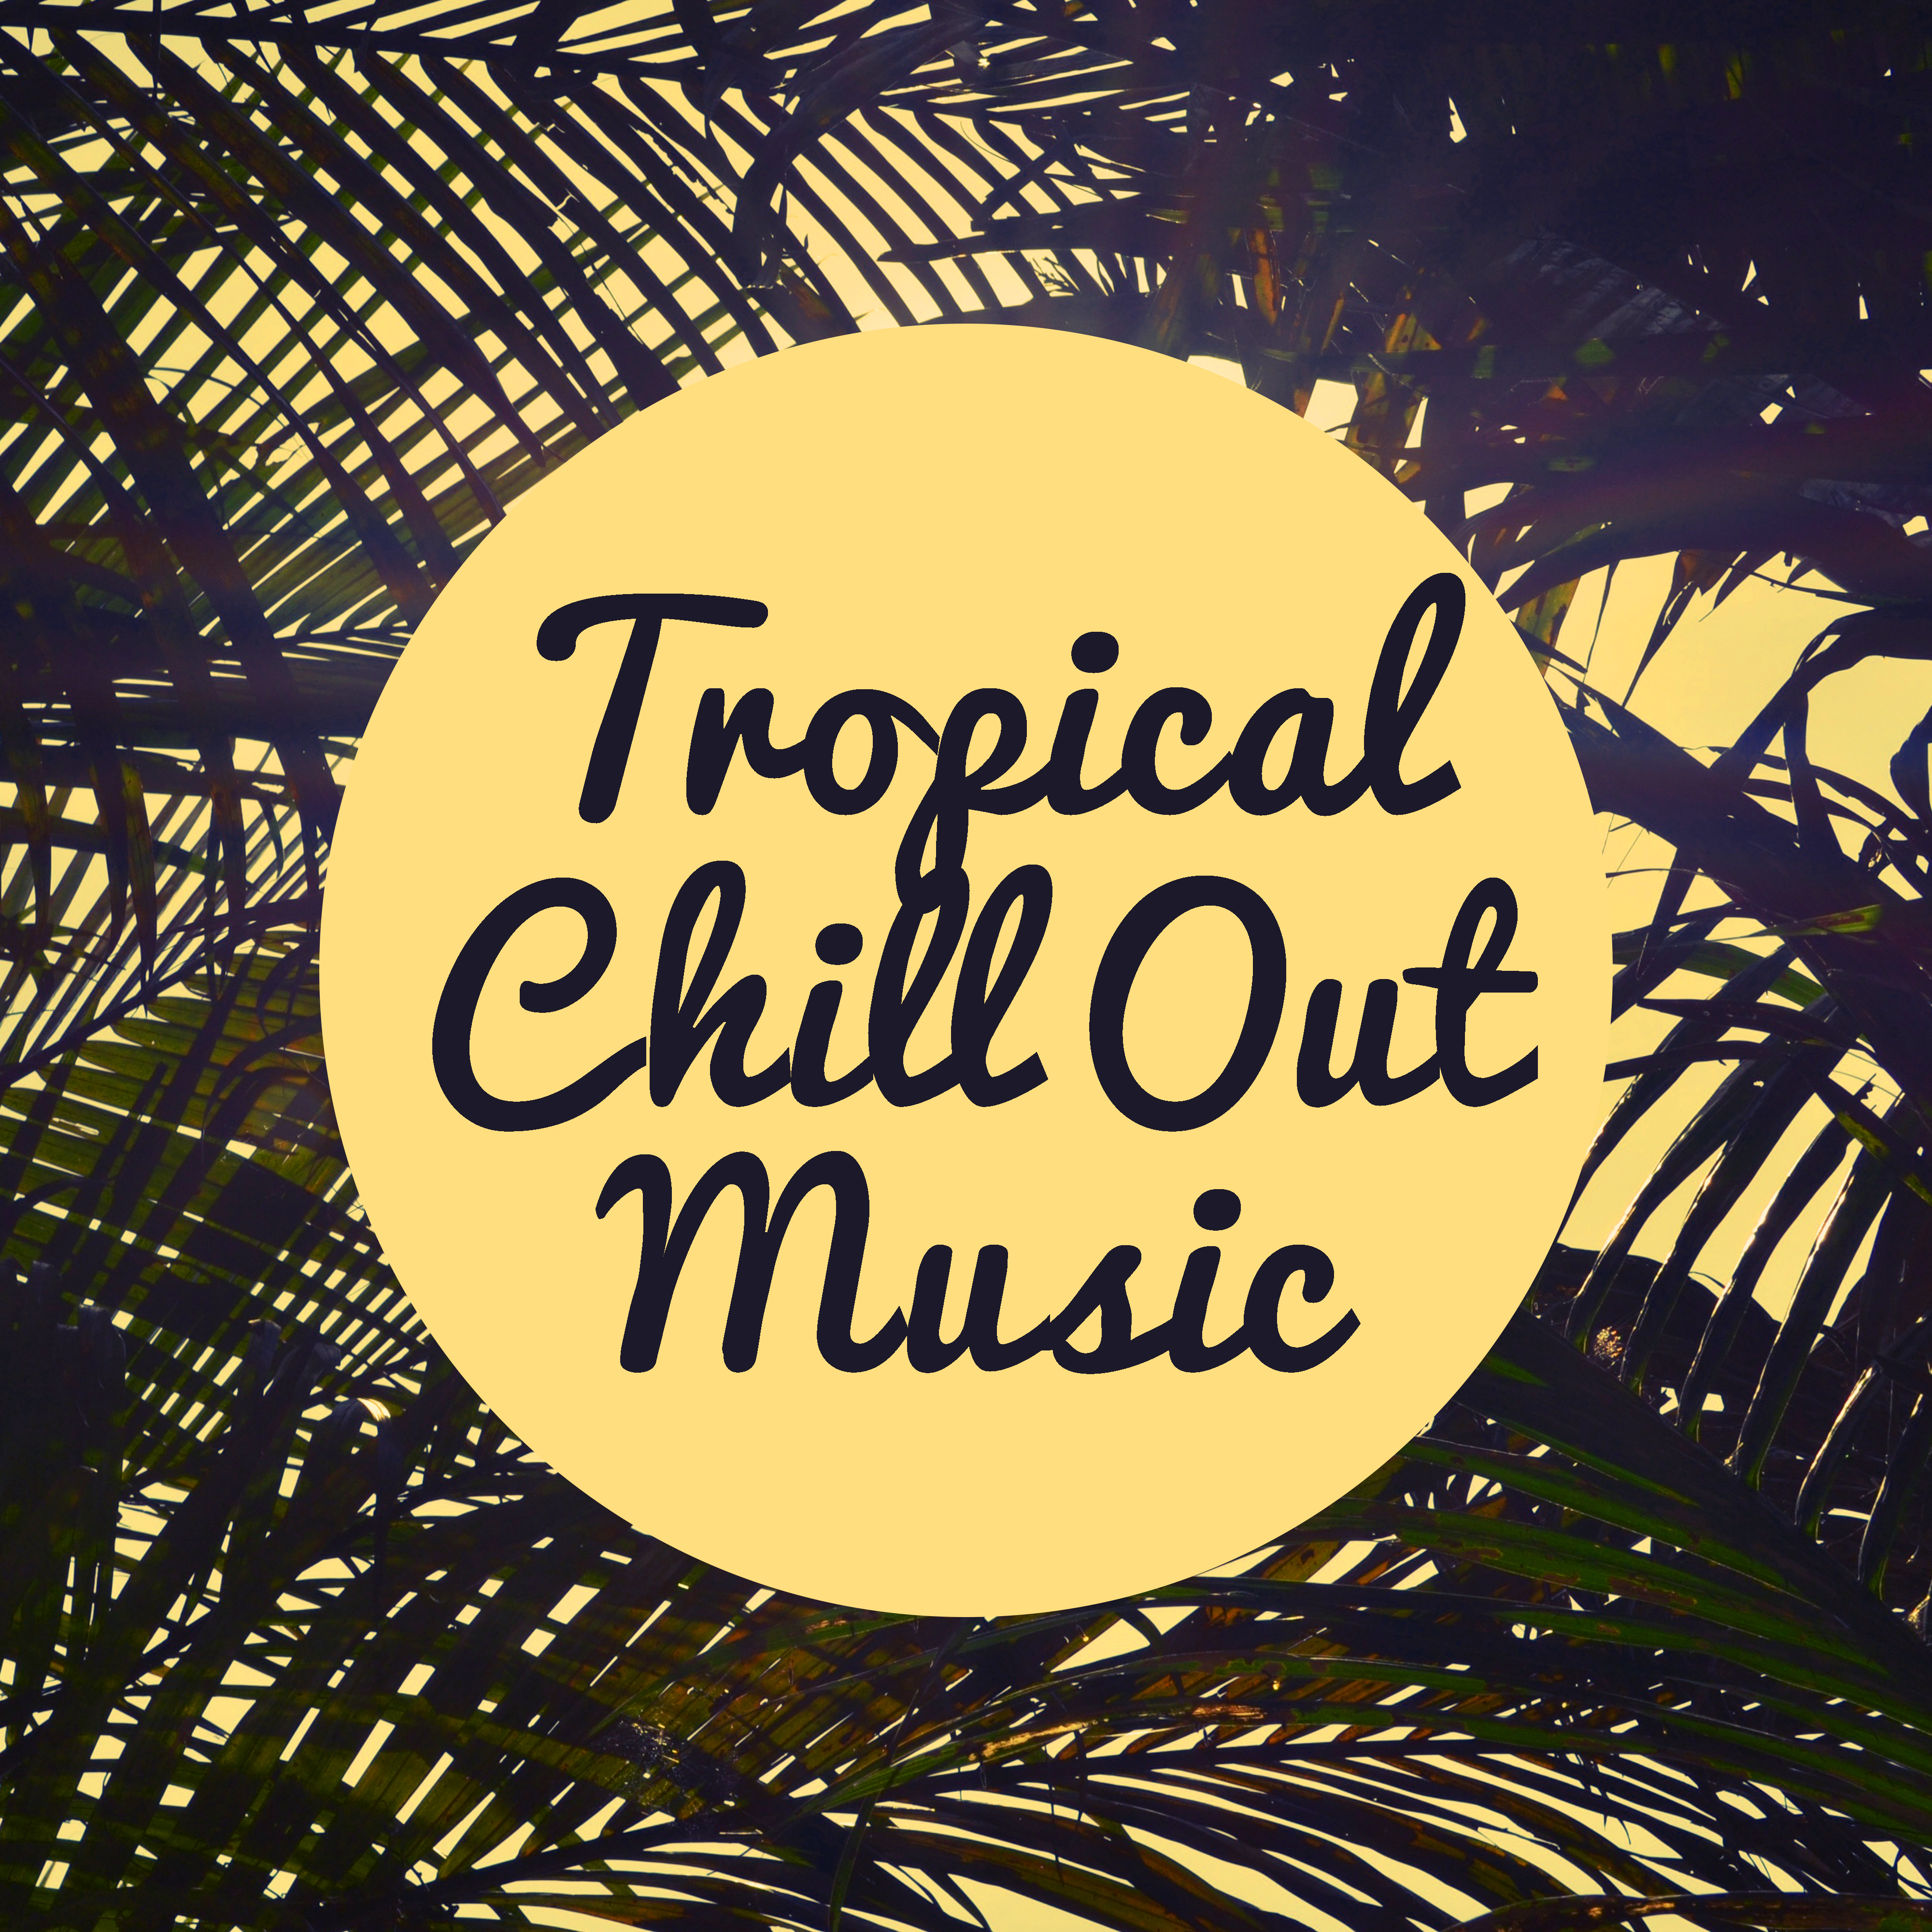 Tropical Chill Out Music – Easy Listening, Stress Relief, Peaceful Songs, Beach Lounge, Holiday Journey Music